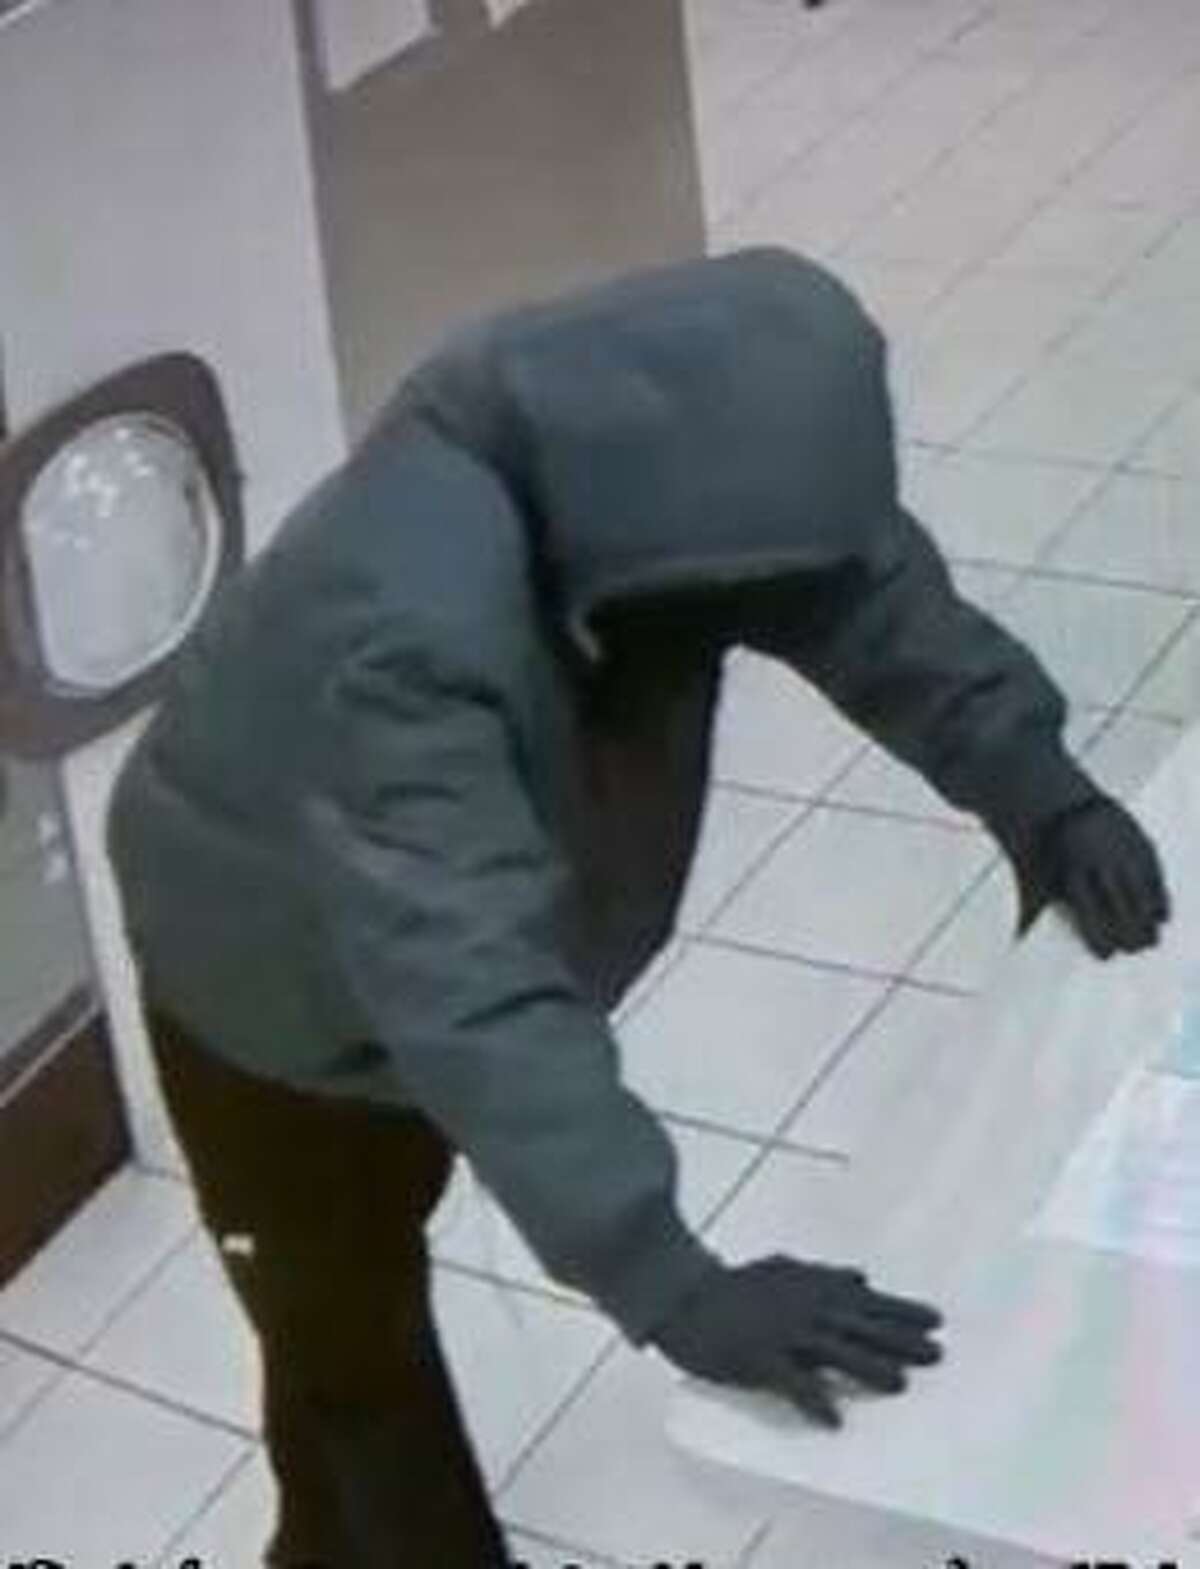 Police are looking for this suspect who robbed the EZ Wash Laundromat on Foxon Road around 8 p.m. Friday.